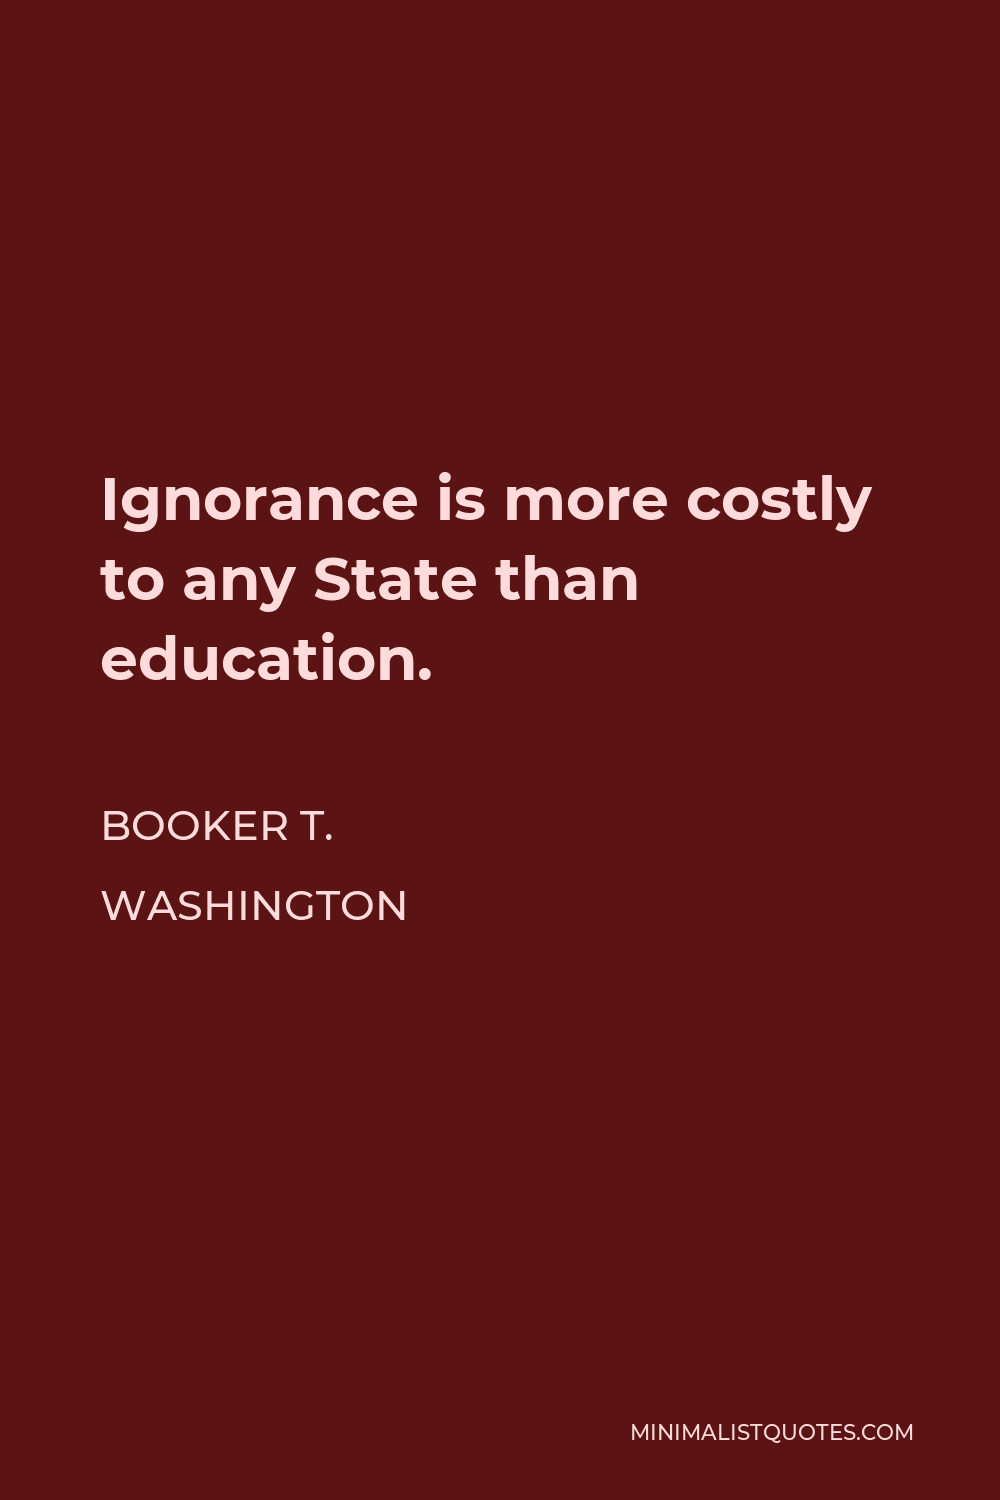 Booker T. Washington Quote - Ignorance is more costly to any State than education.